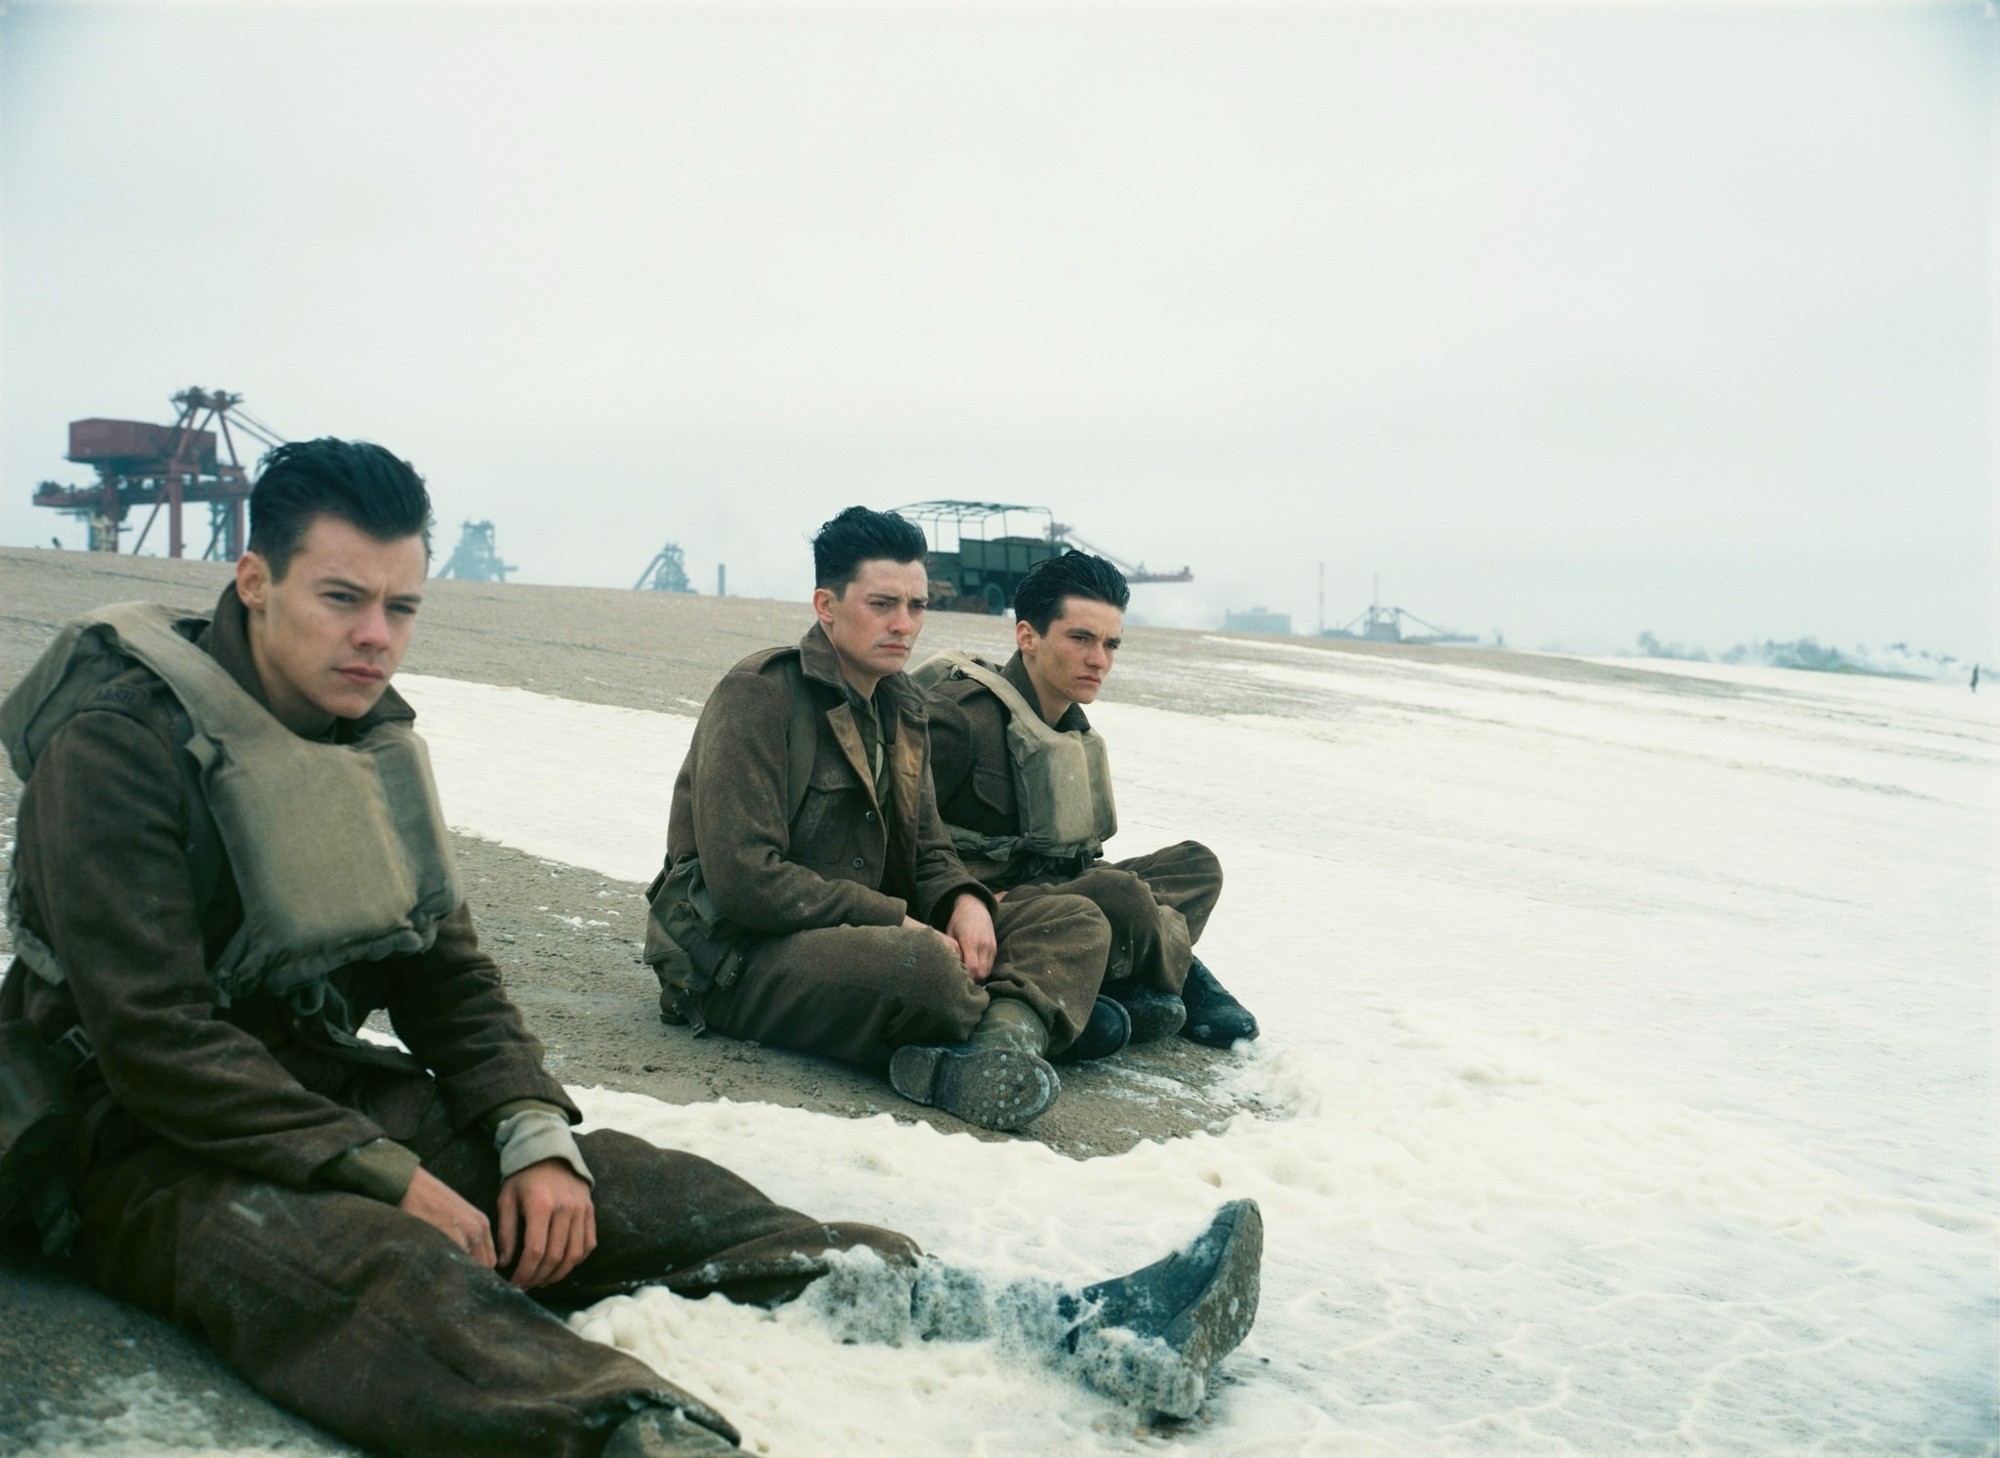 Harry Styles, Aneurin Barnard and Fionn Whitehead in Warner Bros. Pictures' Dunkirk (2017)